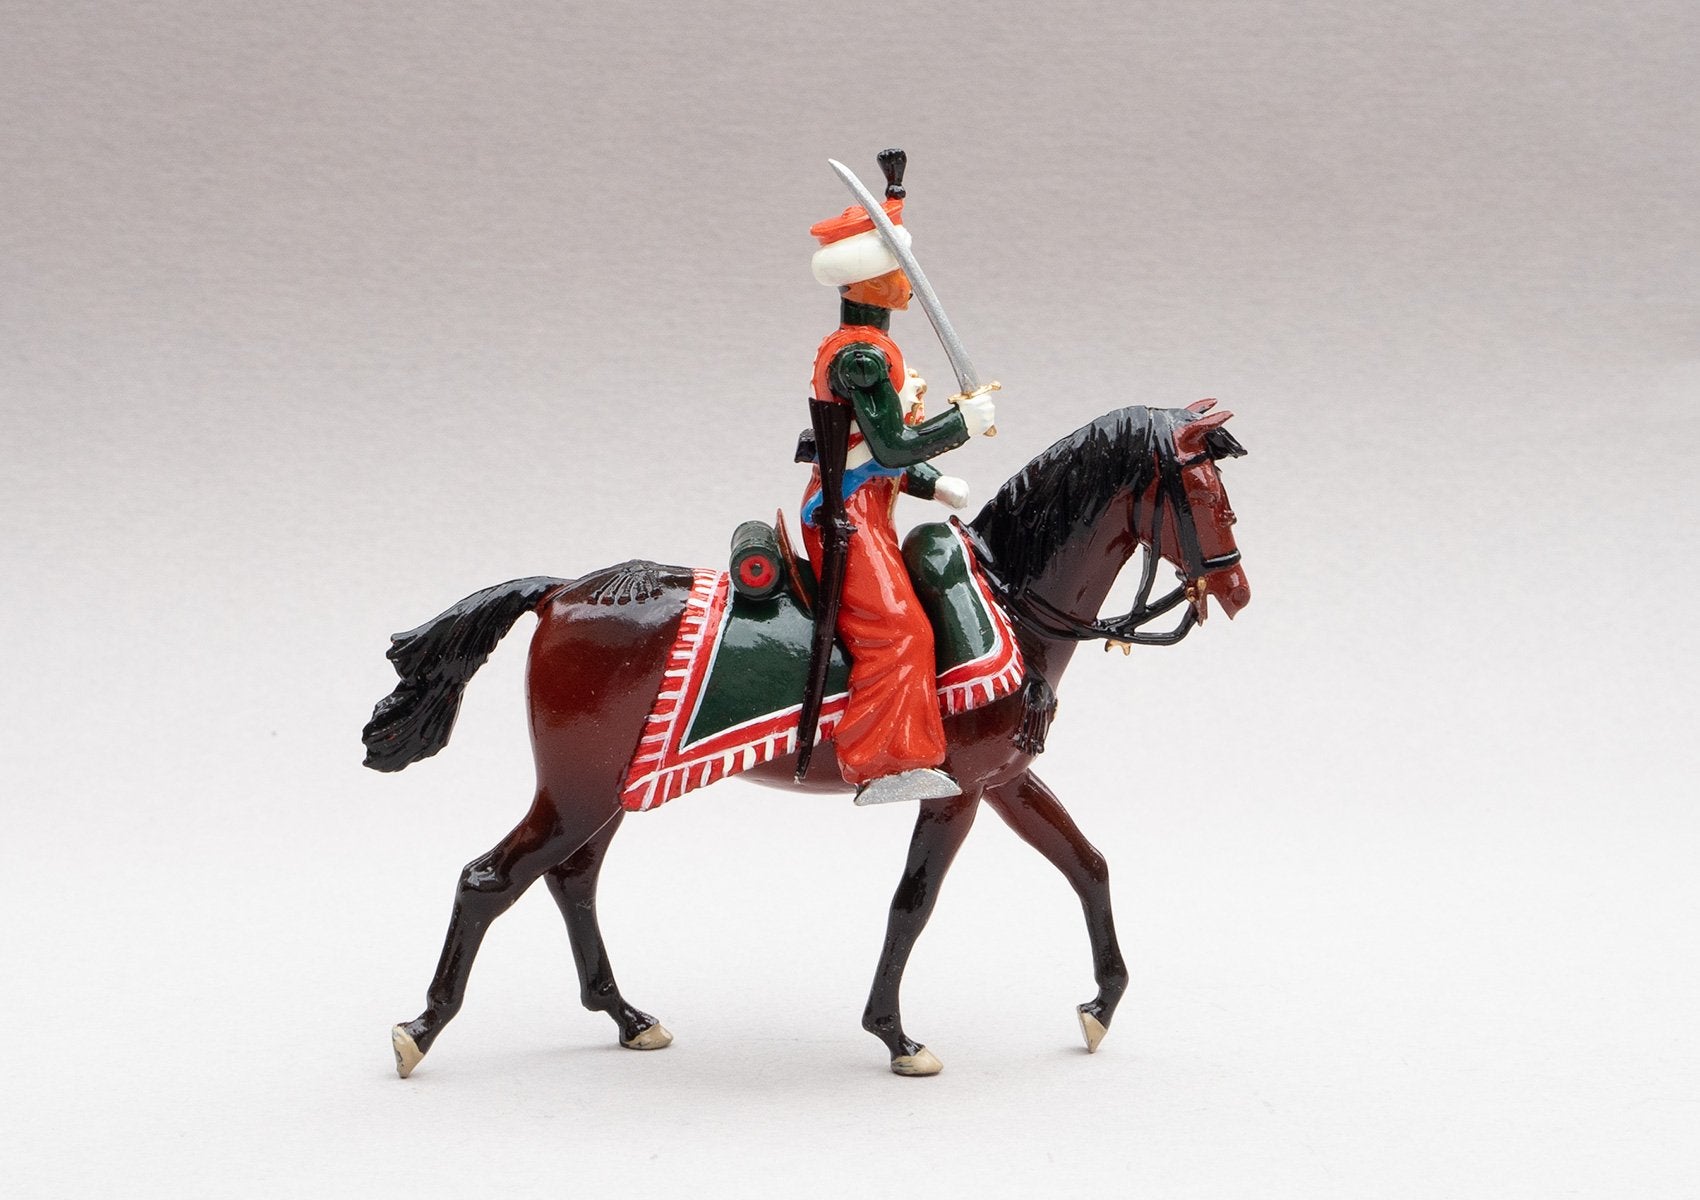 Set 117 Marmelukes | French Cavalry | Napoleonic Wars | Single mounted cavalry figure. His uniform is of Syrian and Turkish Mameluke pattern; turban, sleeved chemise, arab sash, charoual-style trousers, and Mameluke sabre | Waterloo | © Imperial Productions | Sculpt by David Cowe